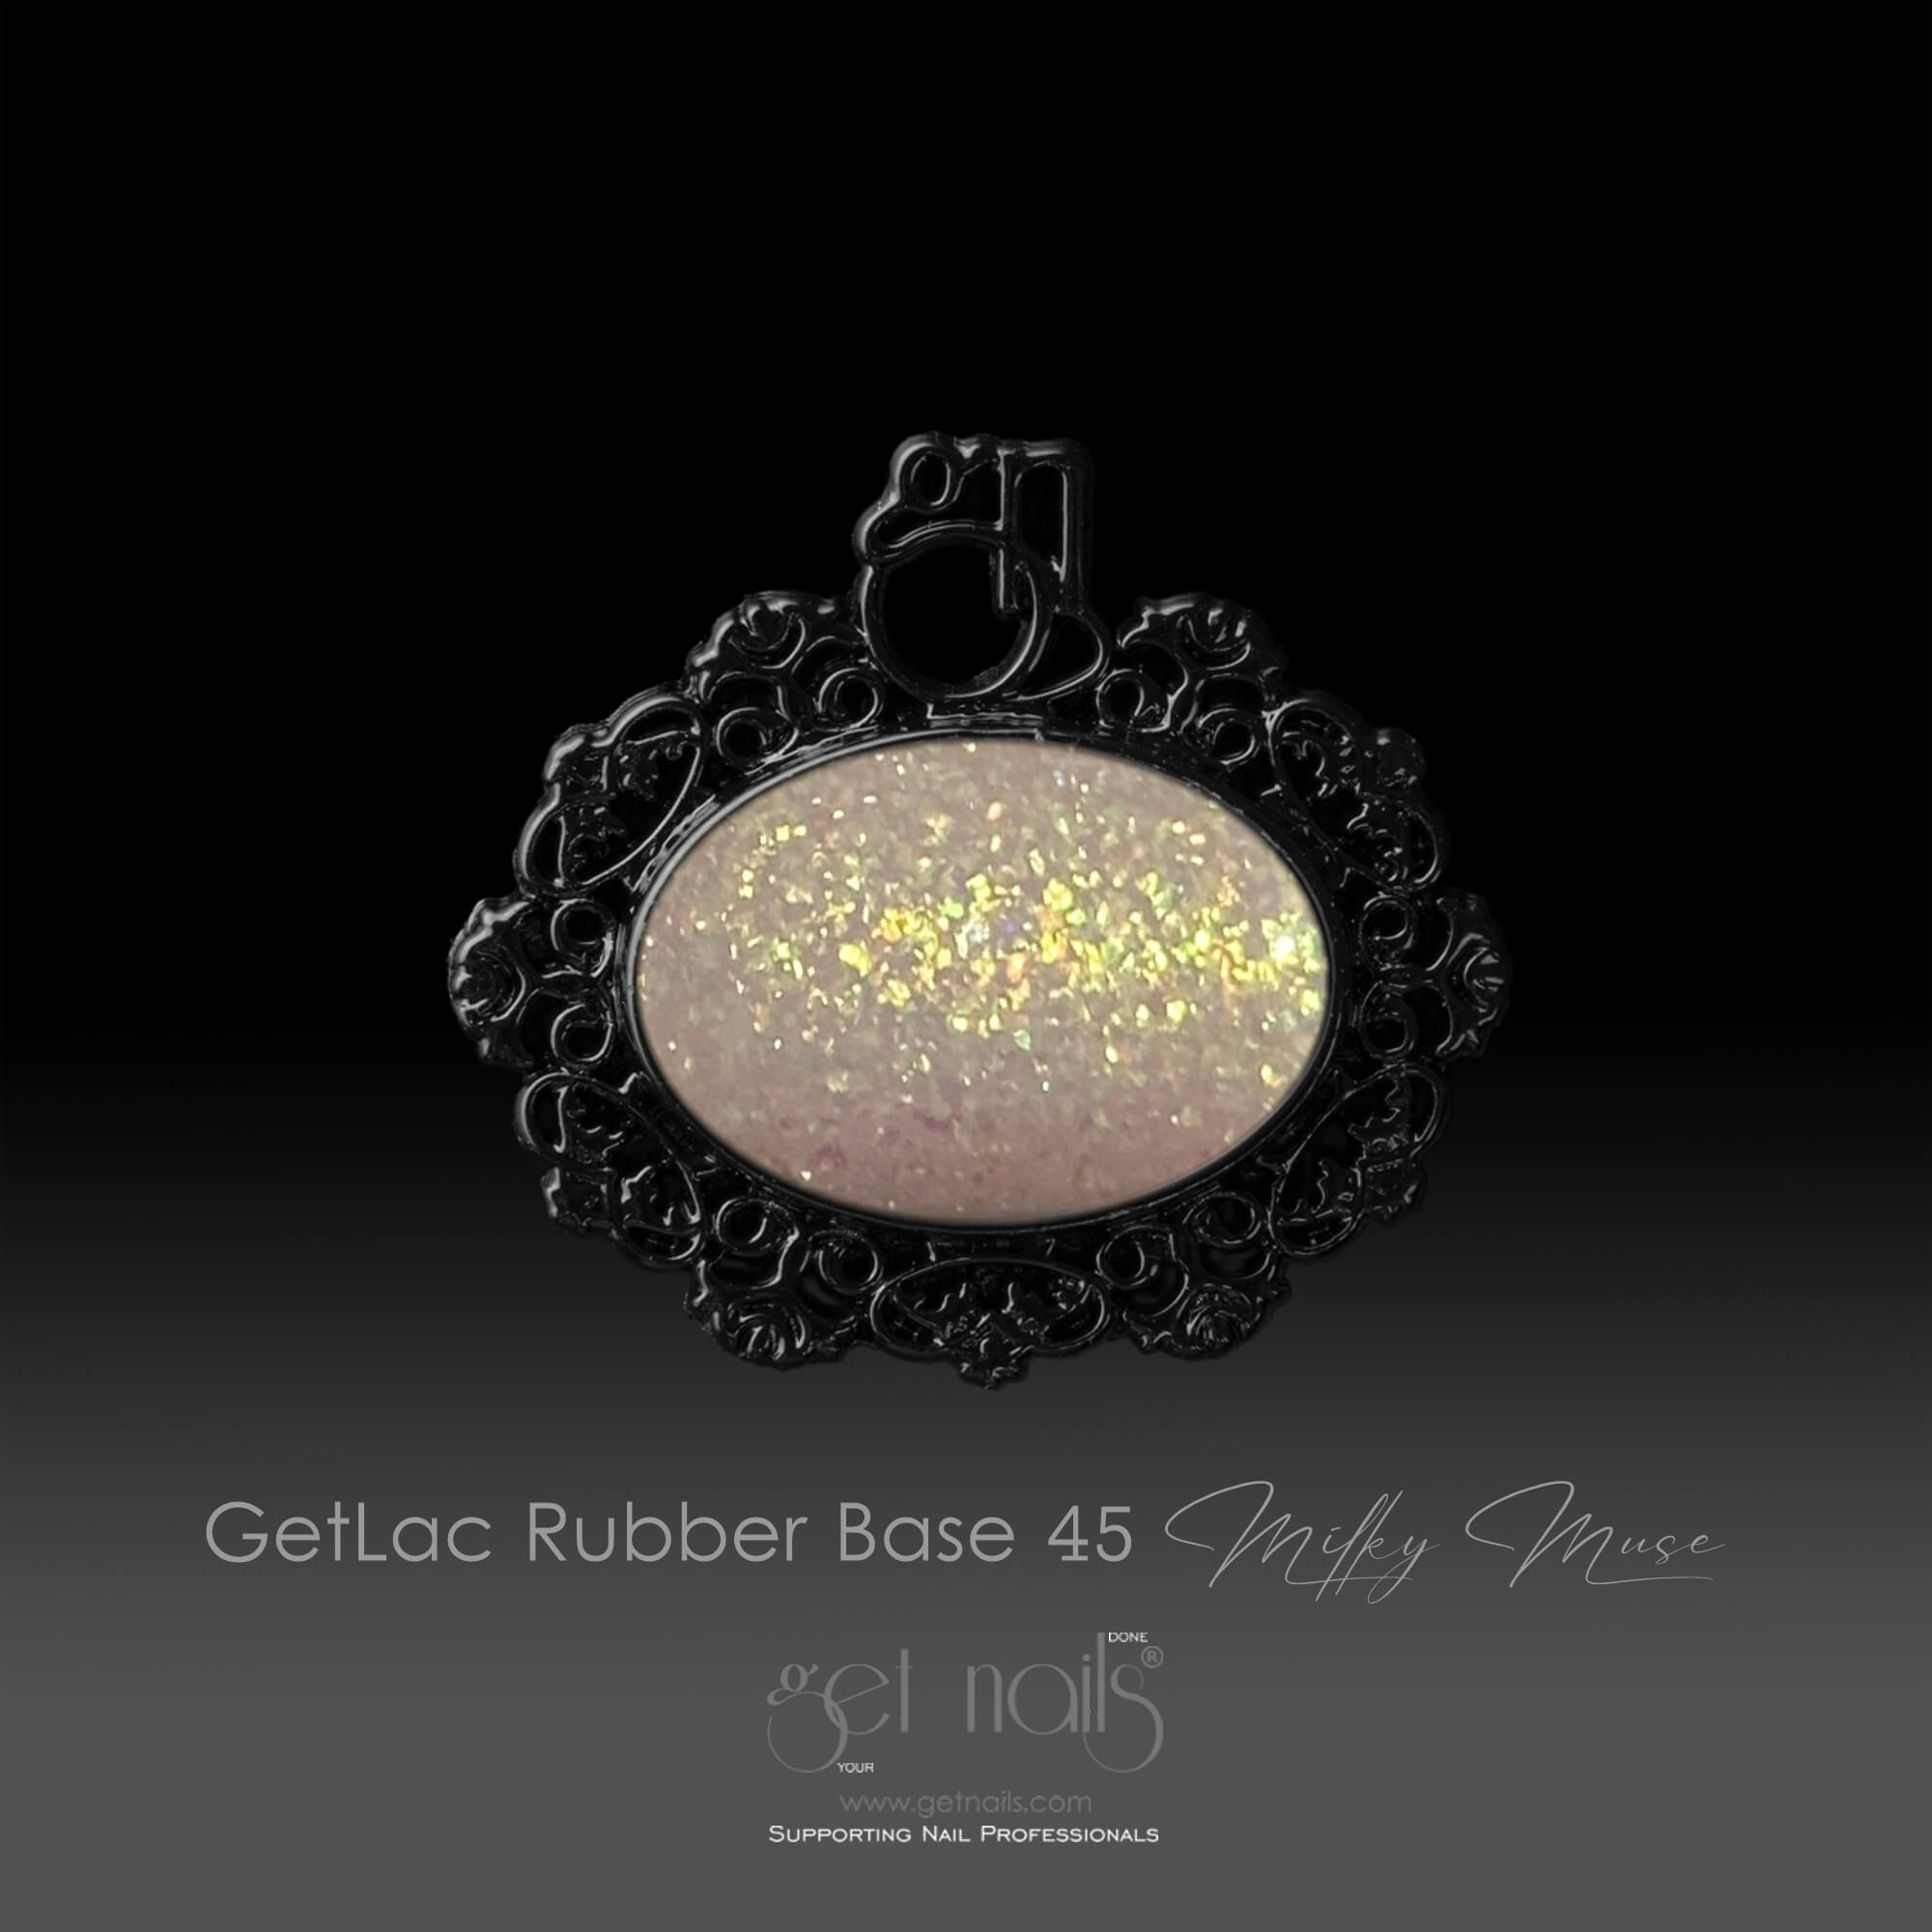 Get Nails Austria - GetLac Rubber Base 45 Milky Muse 15g